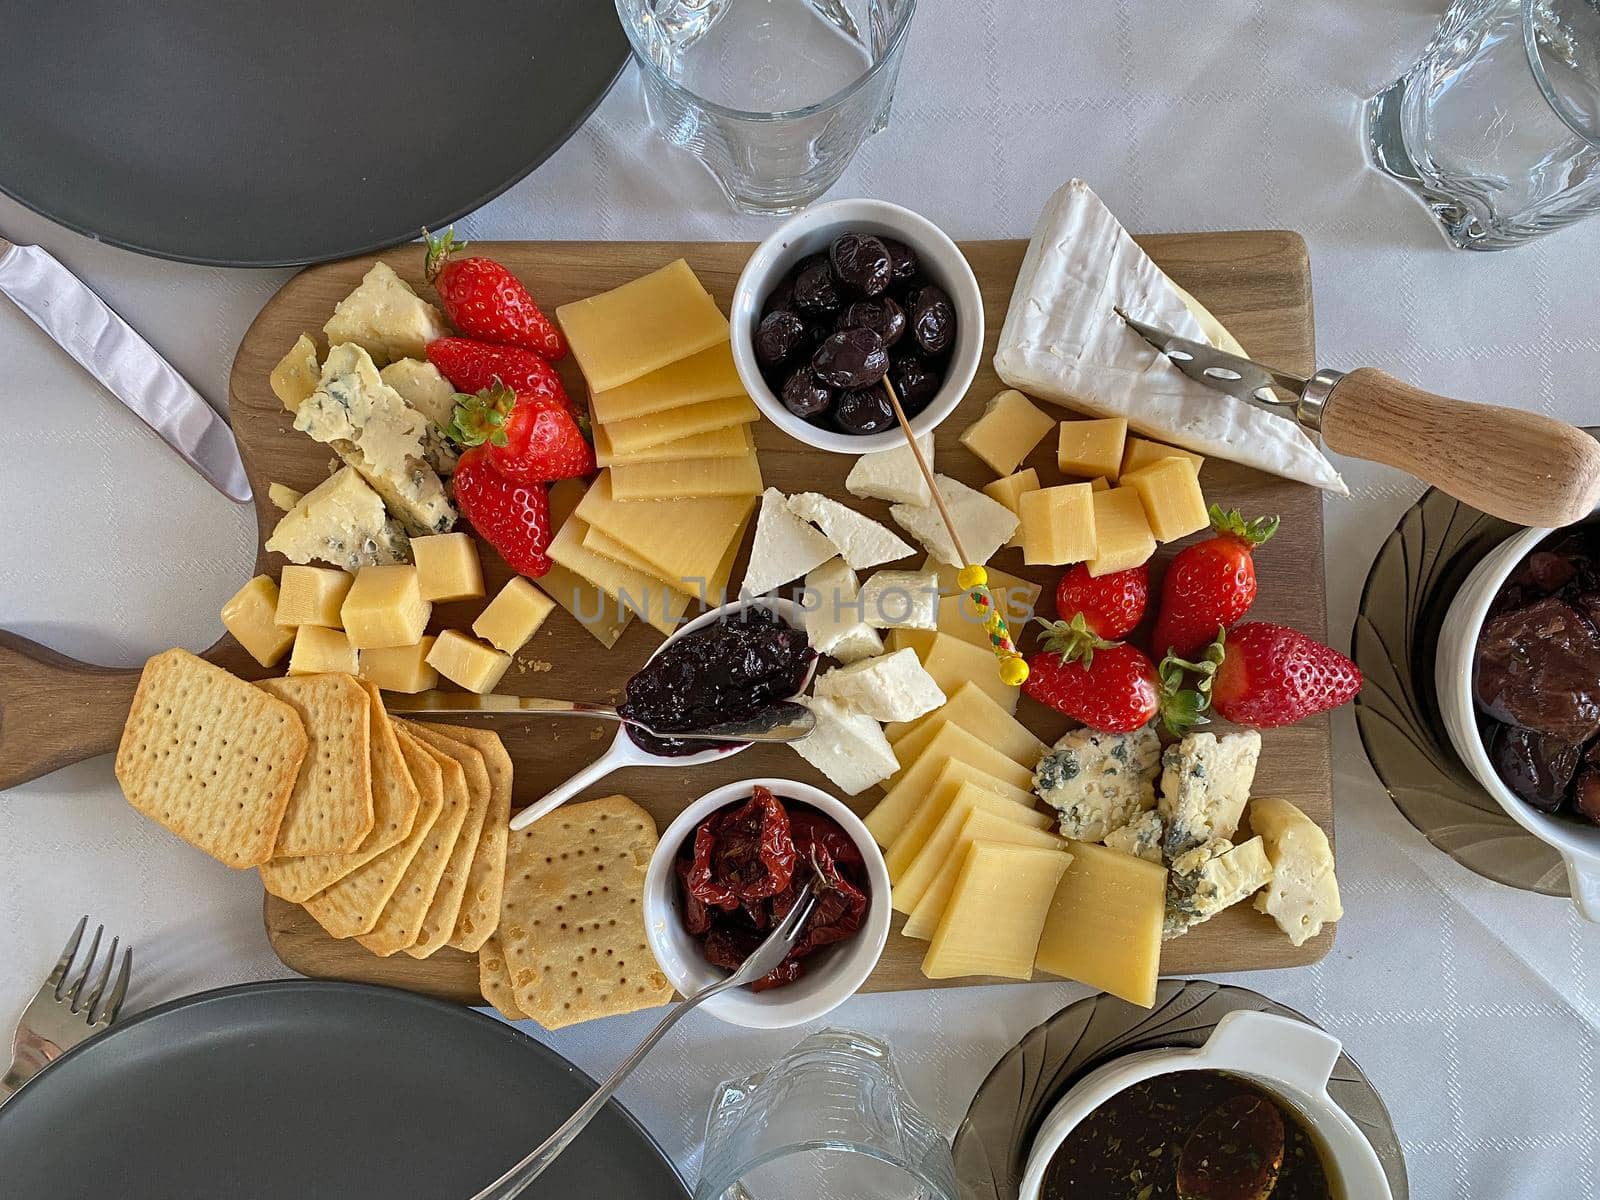 Cheese plate with camembert, brie, dor blue, strawberries, sun-dried tomatoes, olives on a wooden table, top view by Proxima13